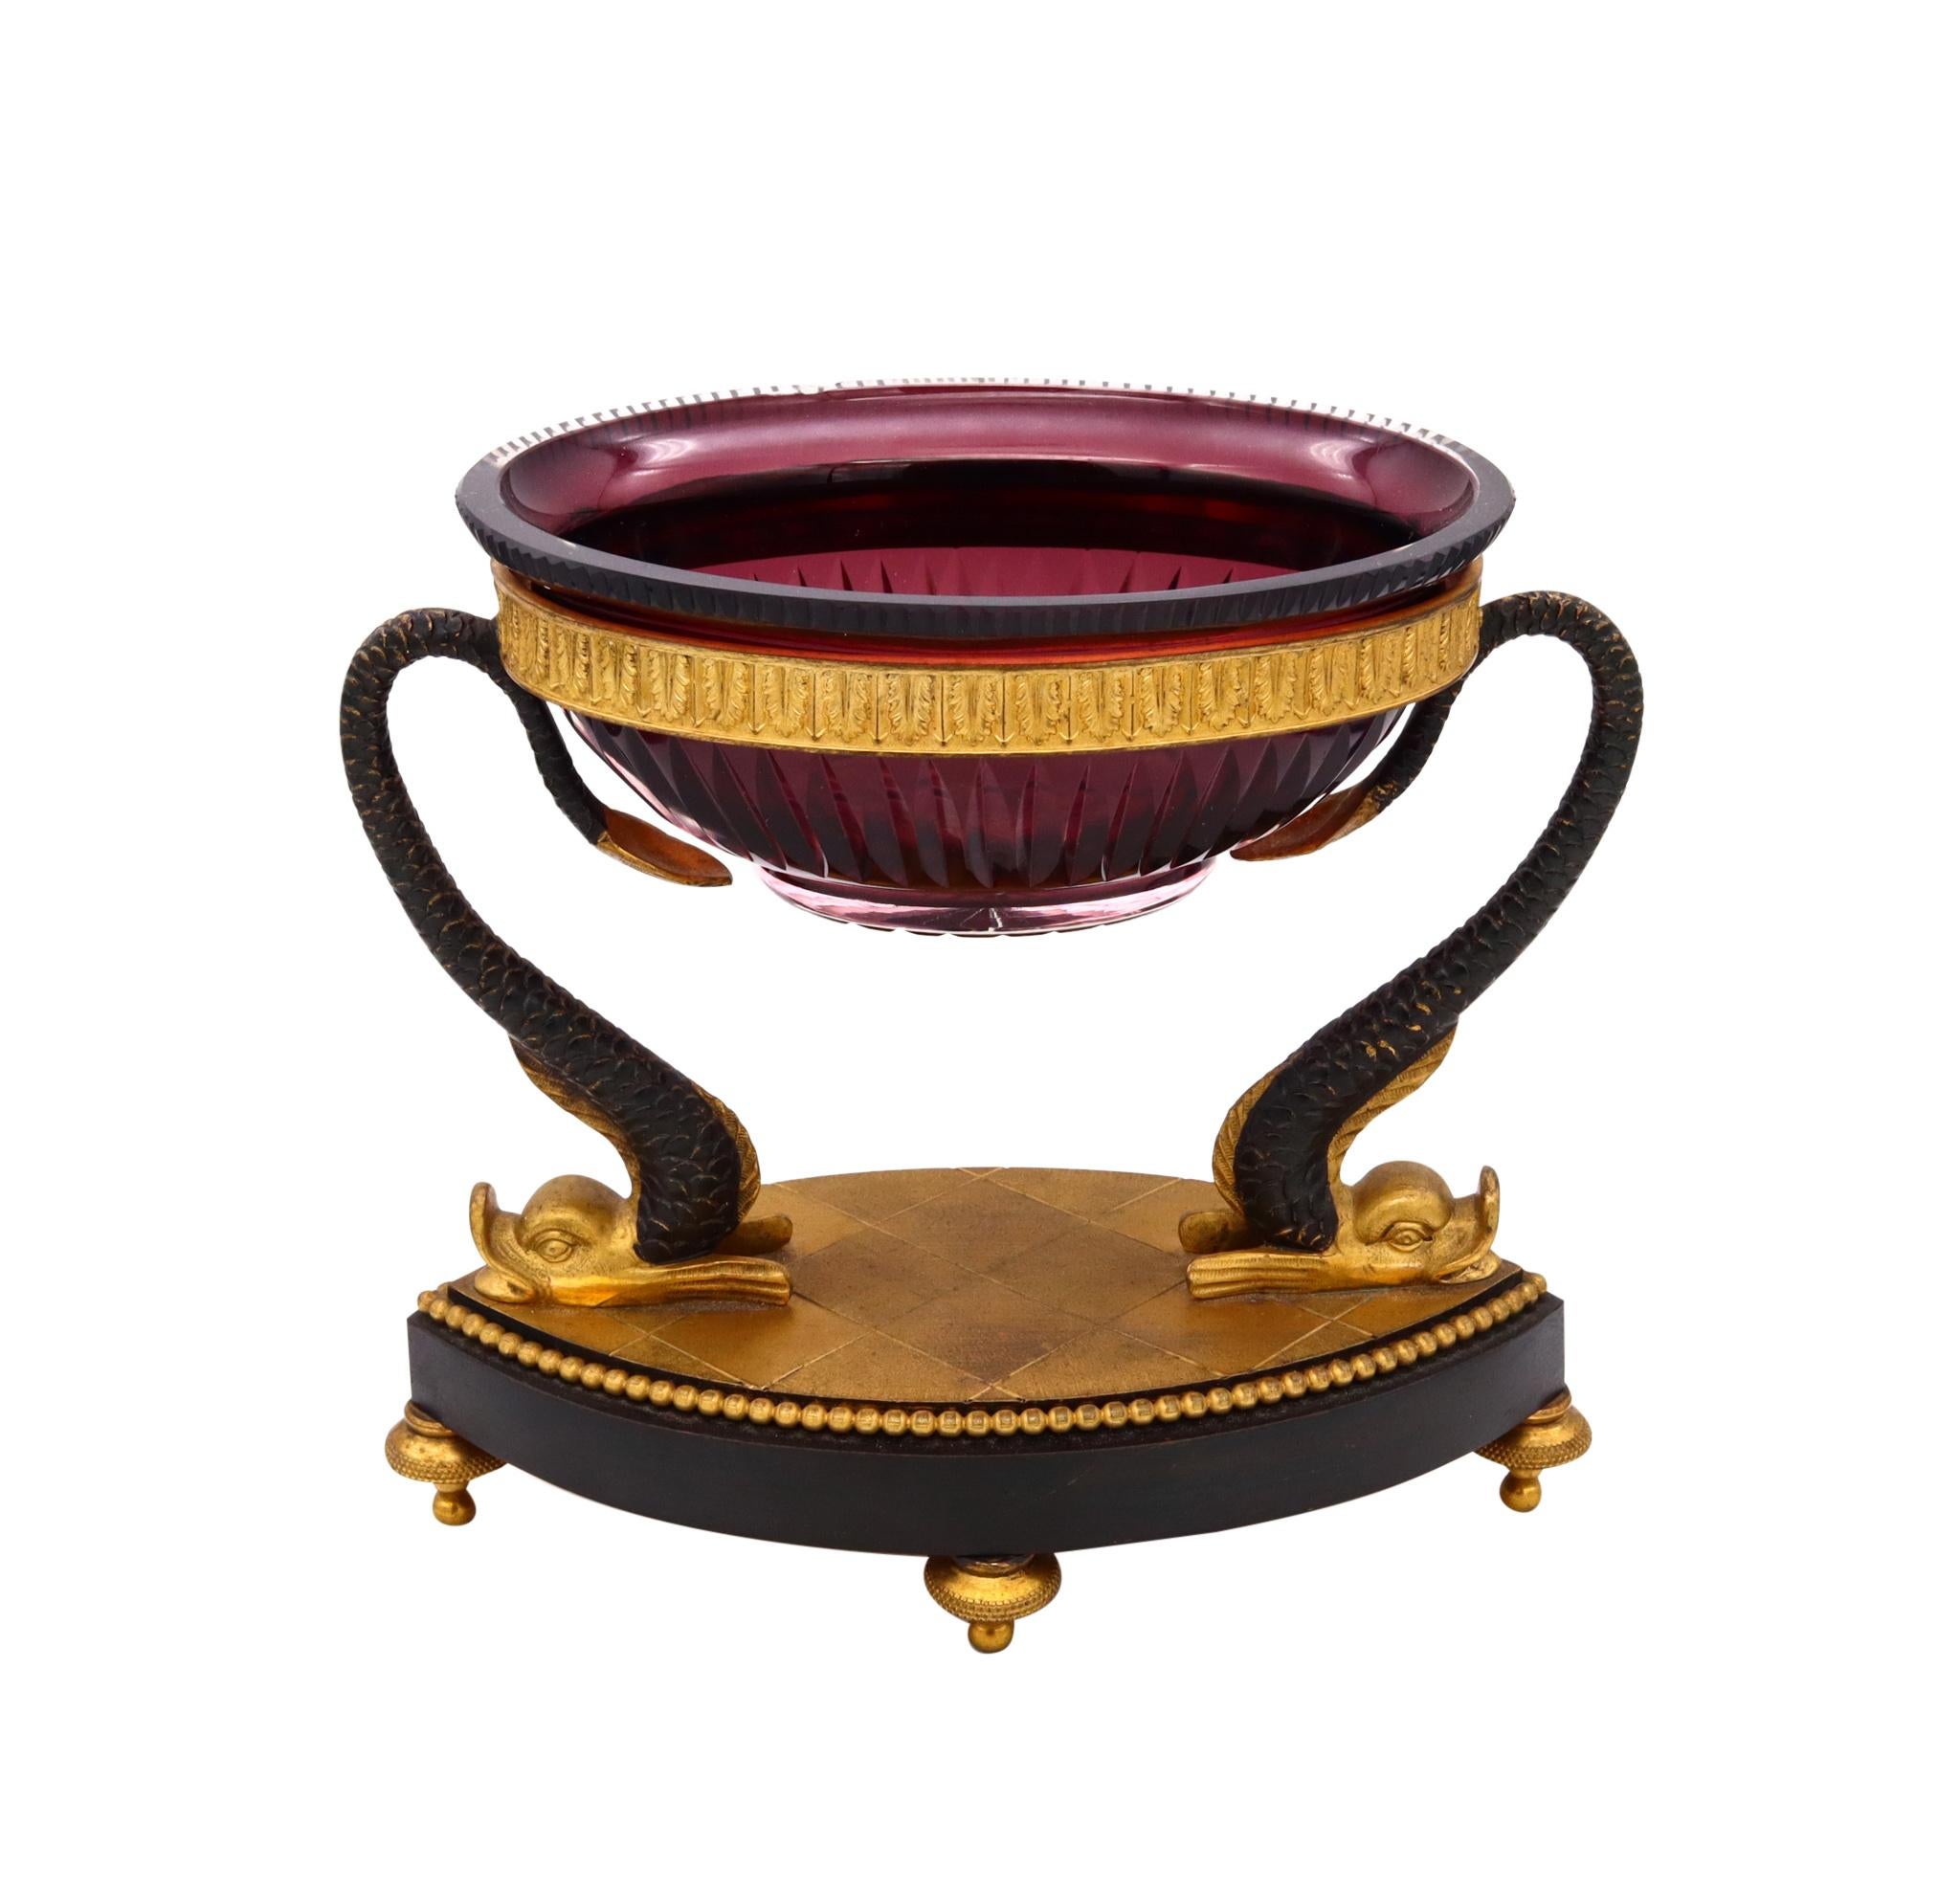 French Ormolu compote with Baccarat cut crystal.

Beautiful and fantastic presentation table compote, created with mythological allegoric patterns in France, during the early period of the 3rd French Empire, Napoleon III (1852-1870), circa 1860.